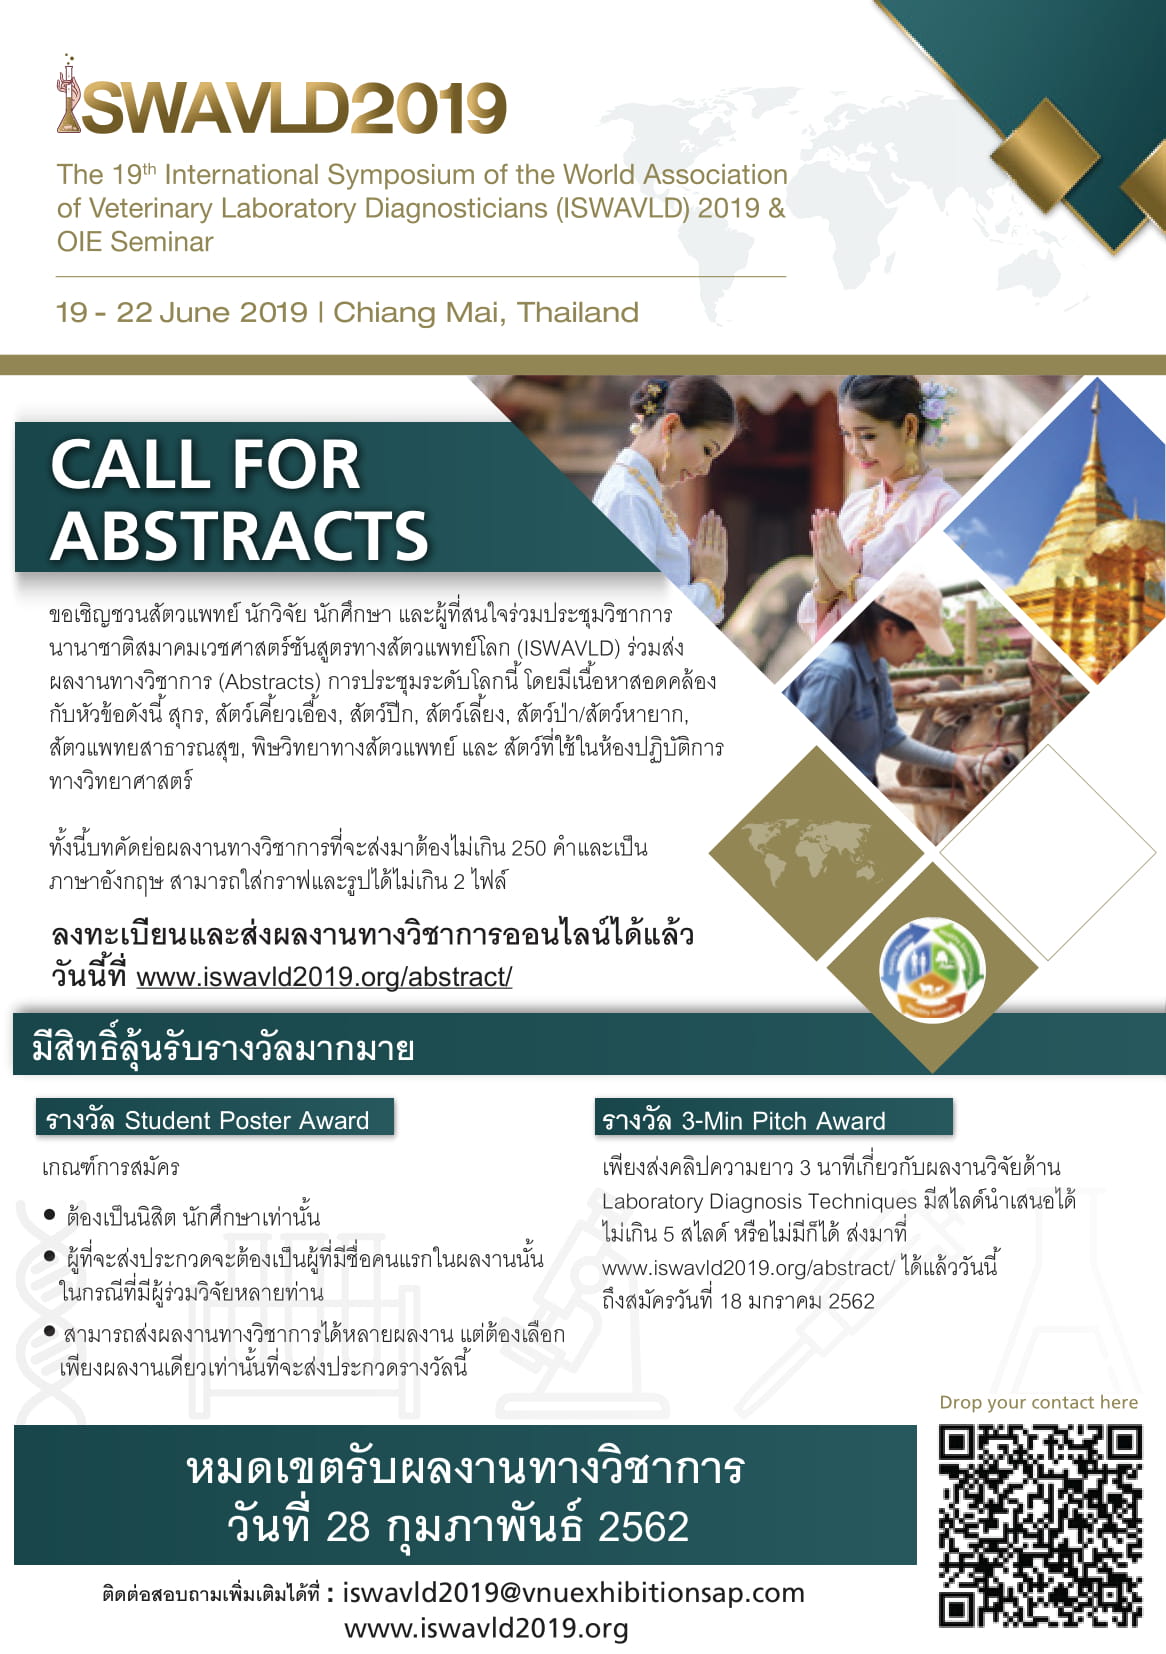 Call for Abstracts Thai A5 1